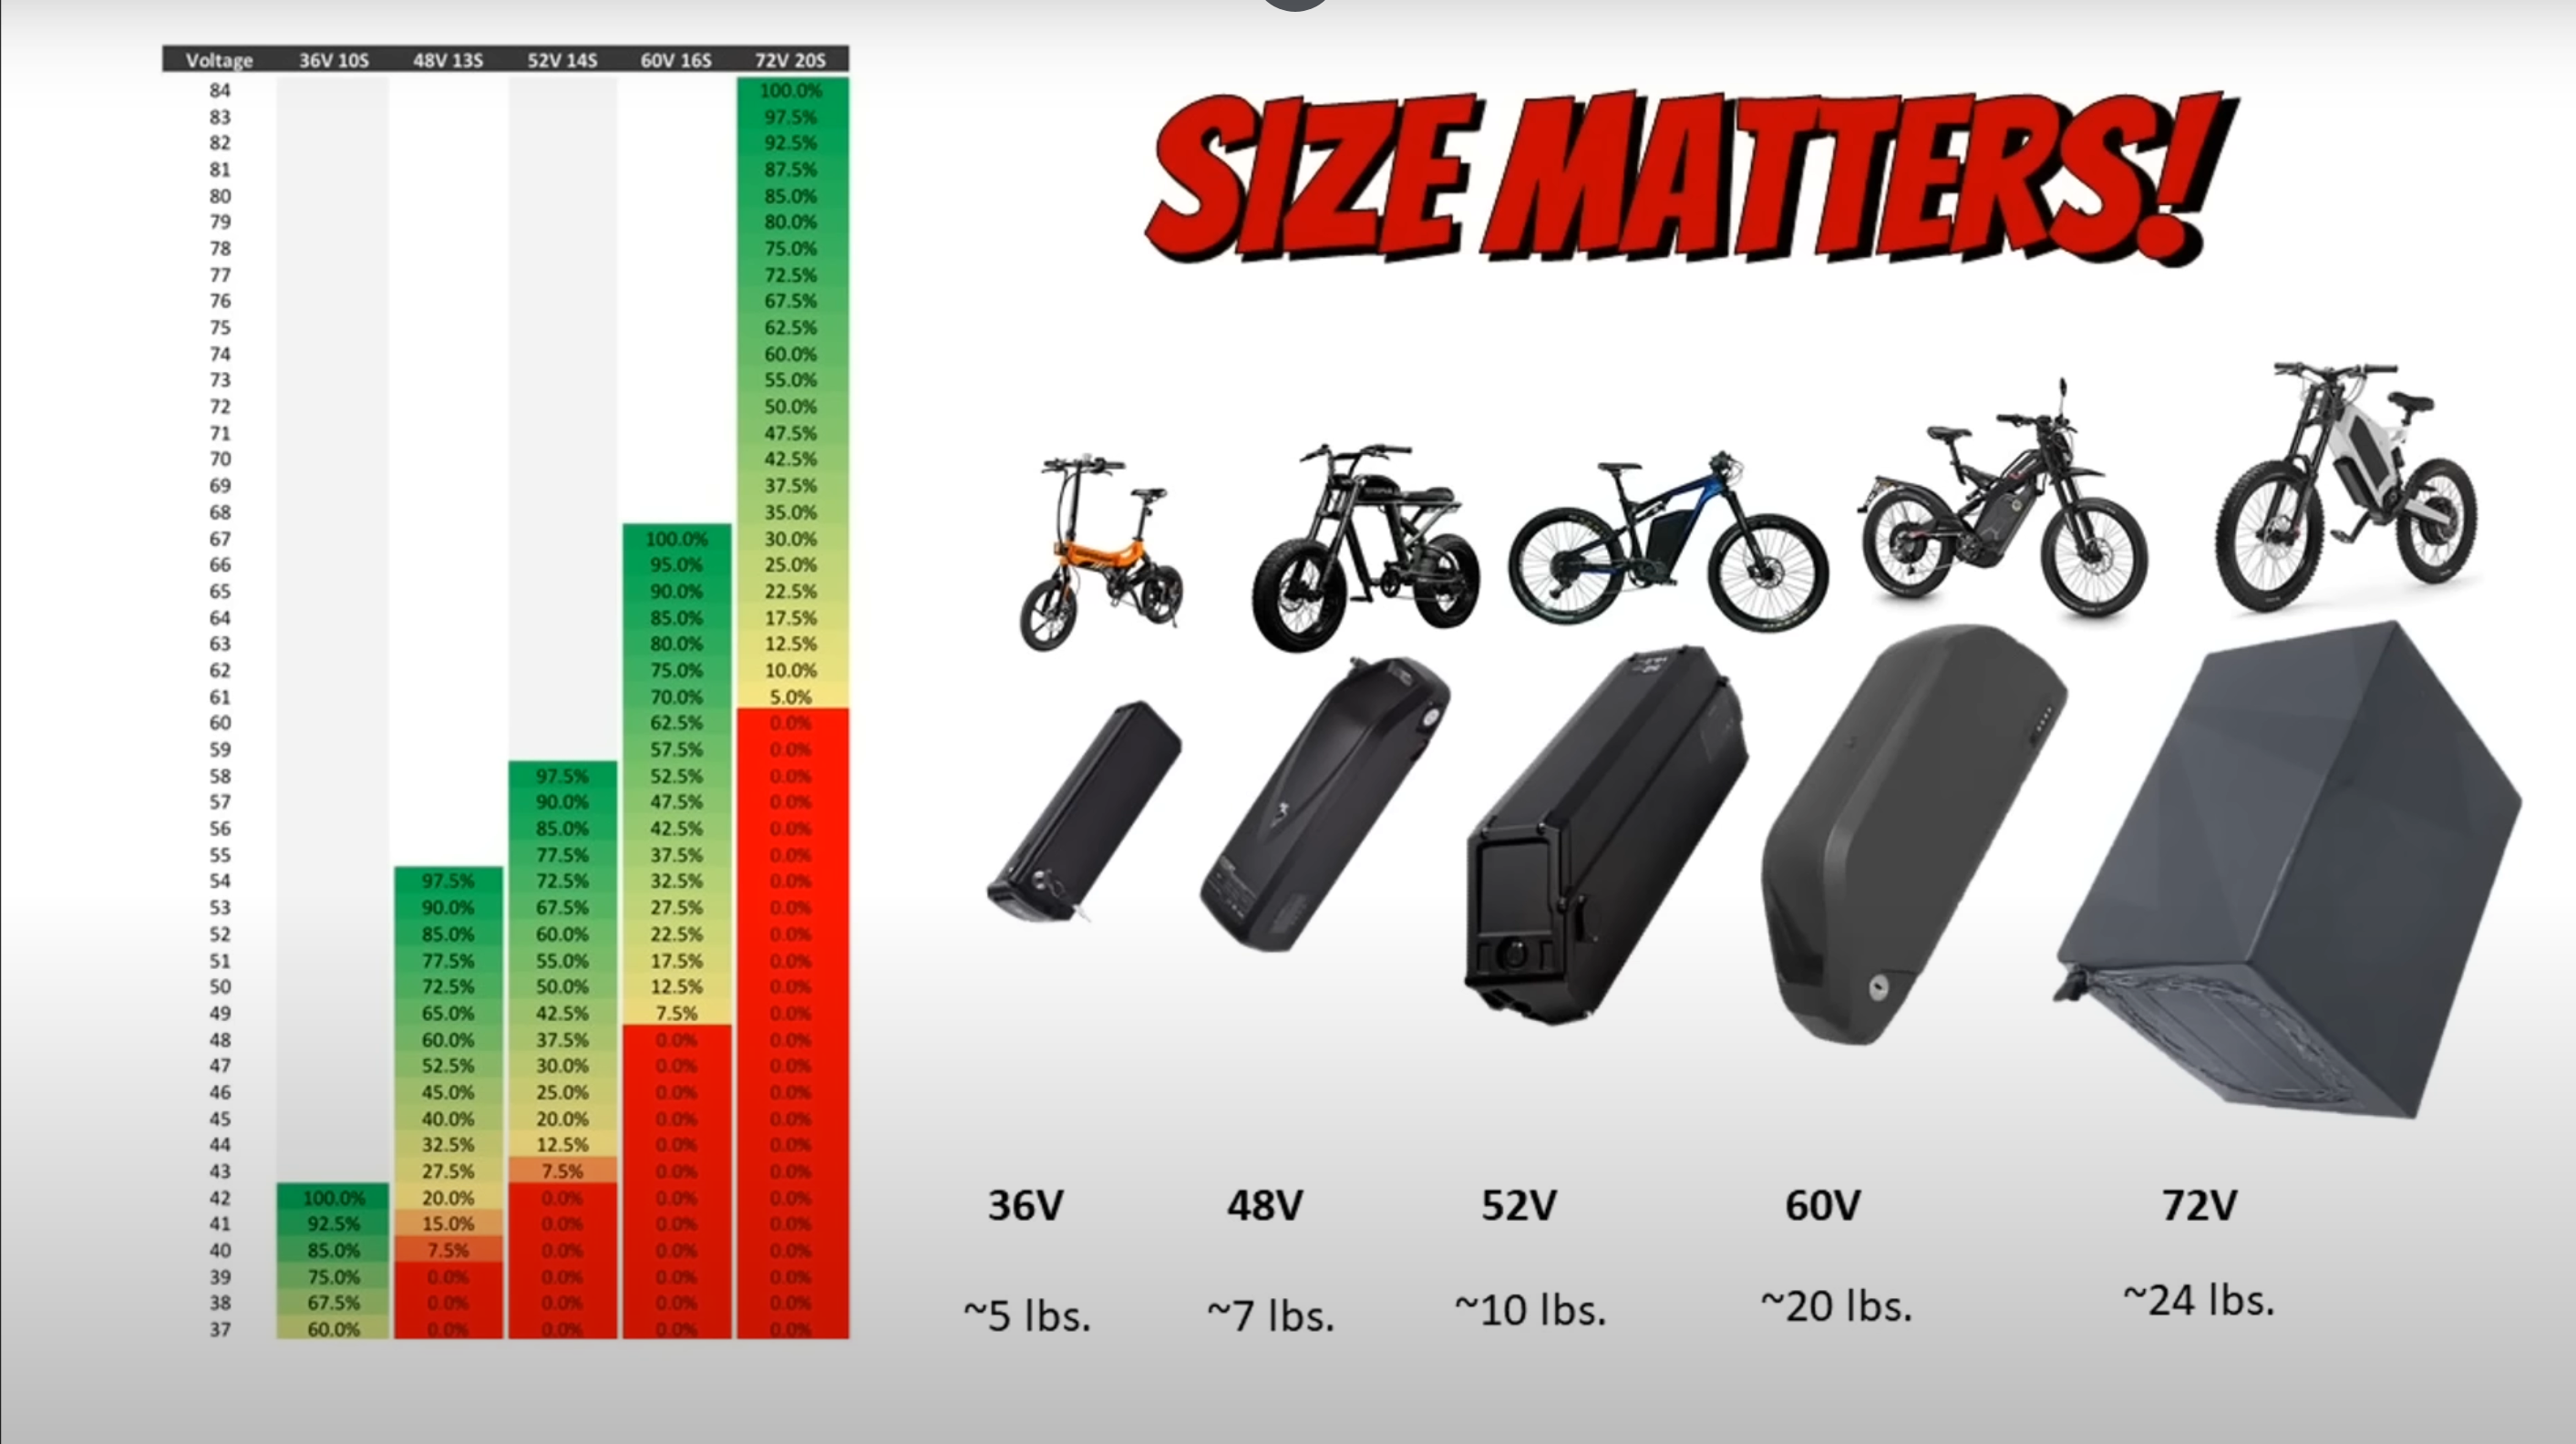 A picture of different types of e Bike batteries